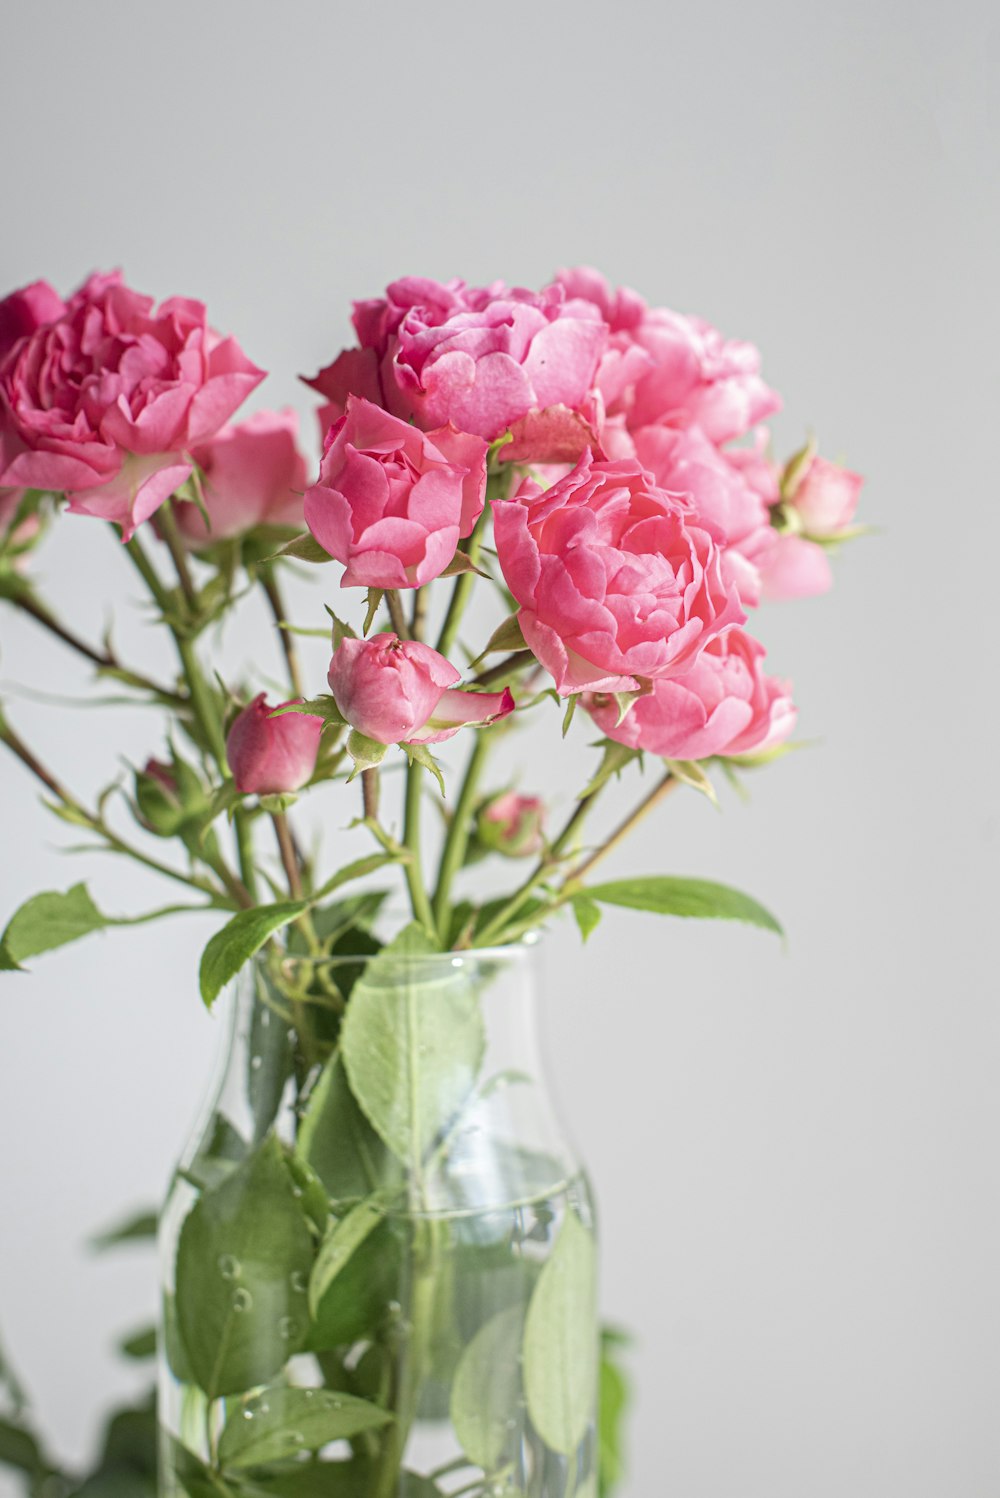 pink flowers in clear glass vase photo – Free Europe Image on Unsplash